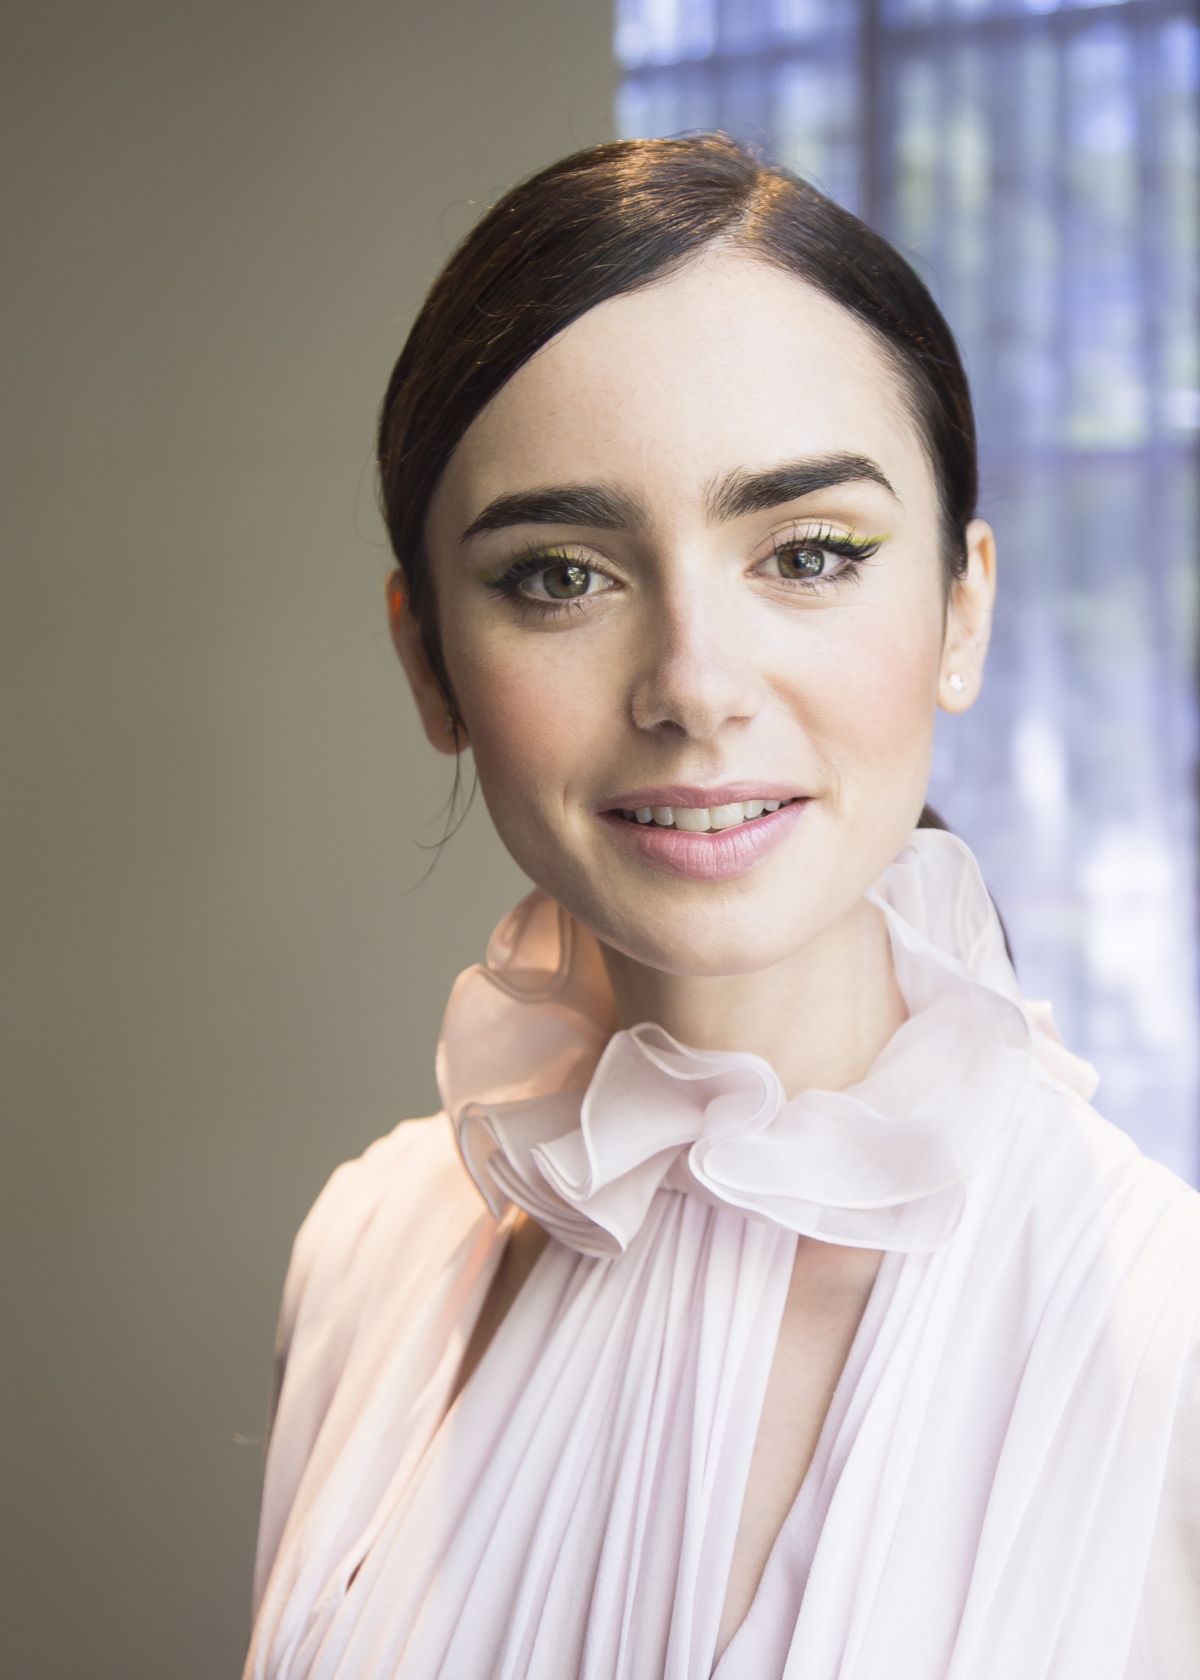 LILY COLLINS at “Rules Don’t Apply’ Press COnference in Beverly Hills ...